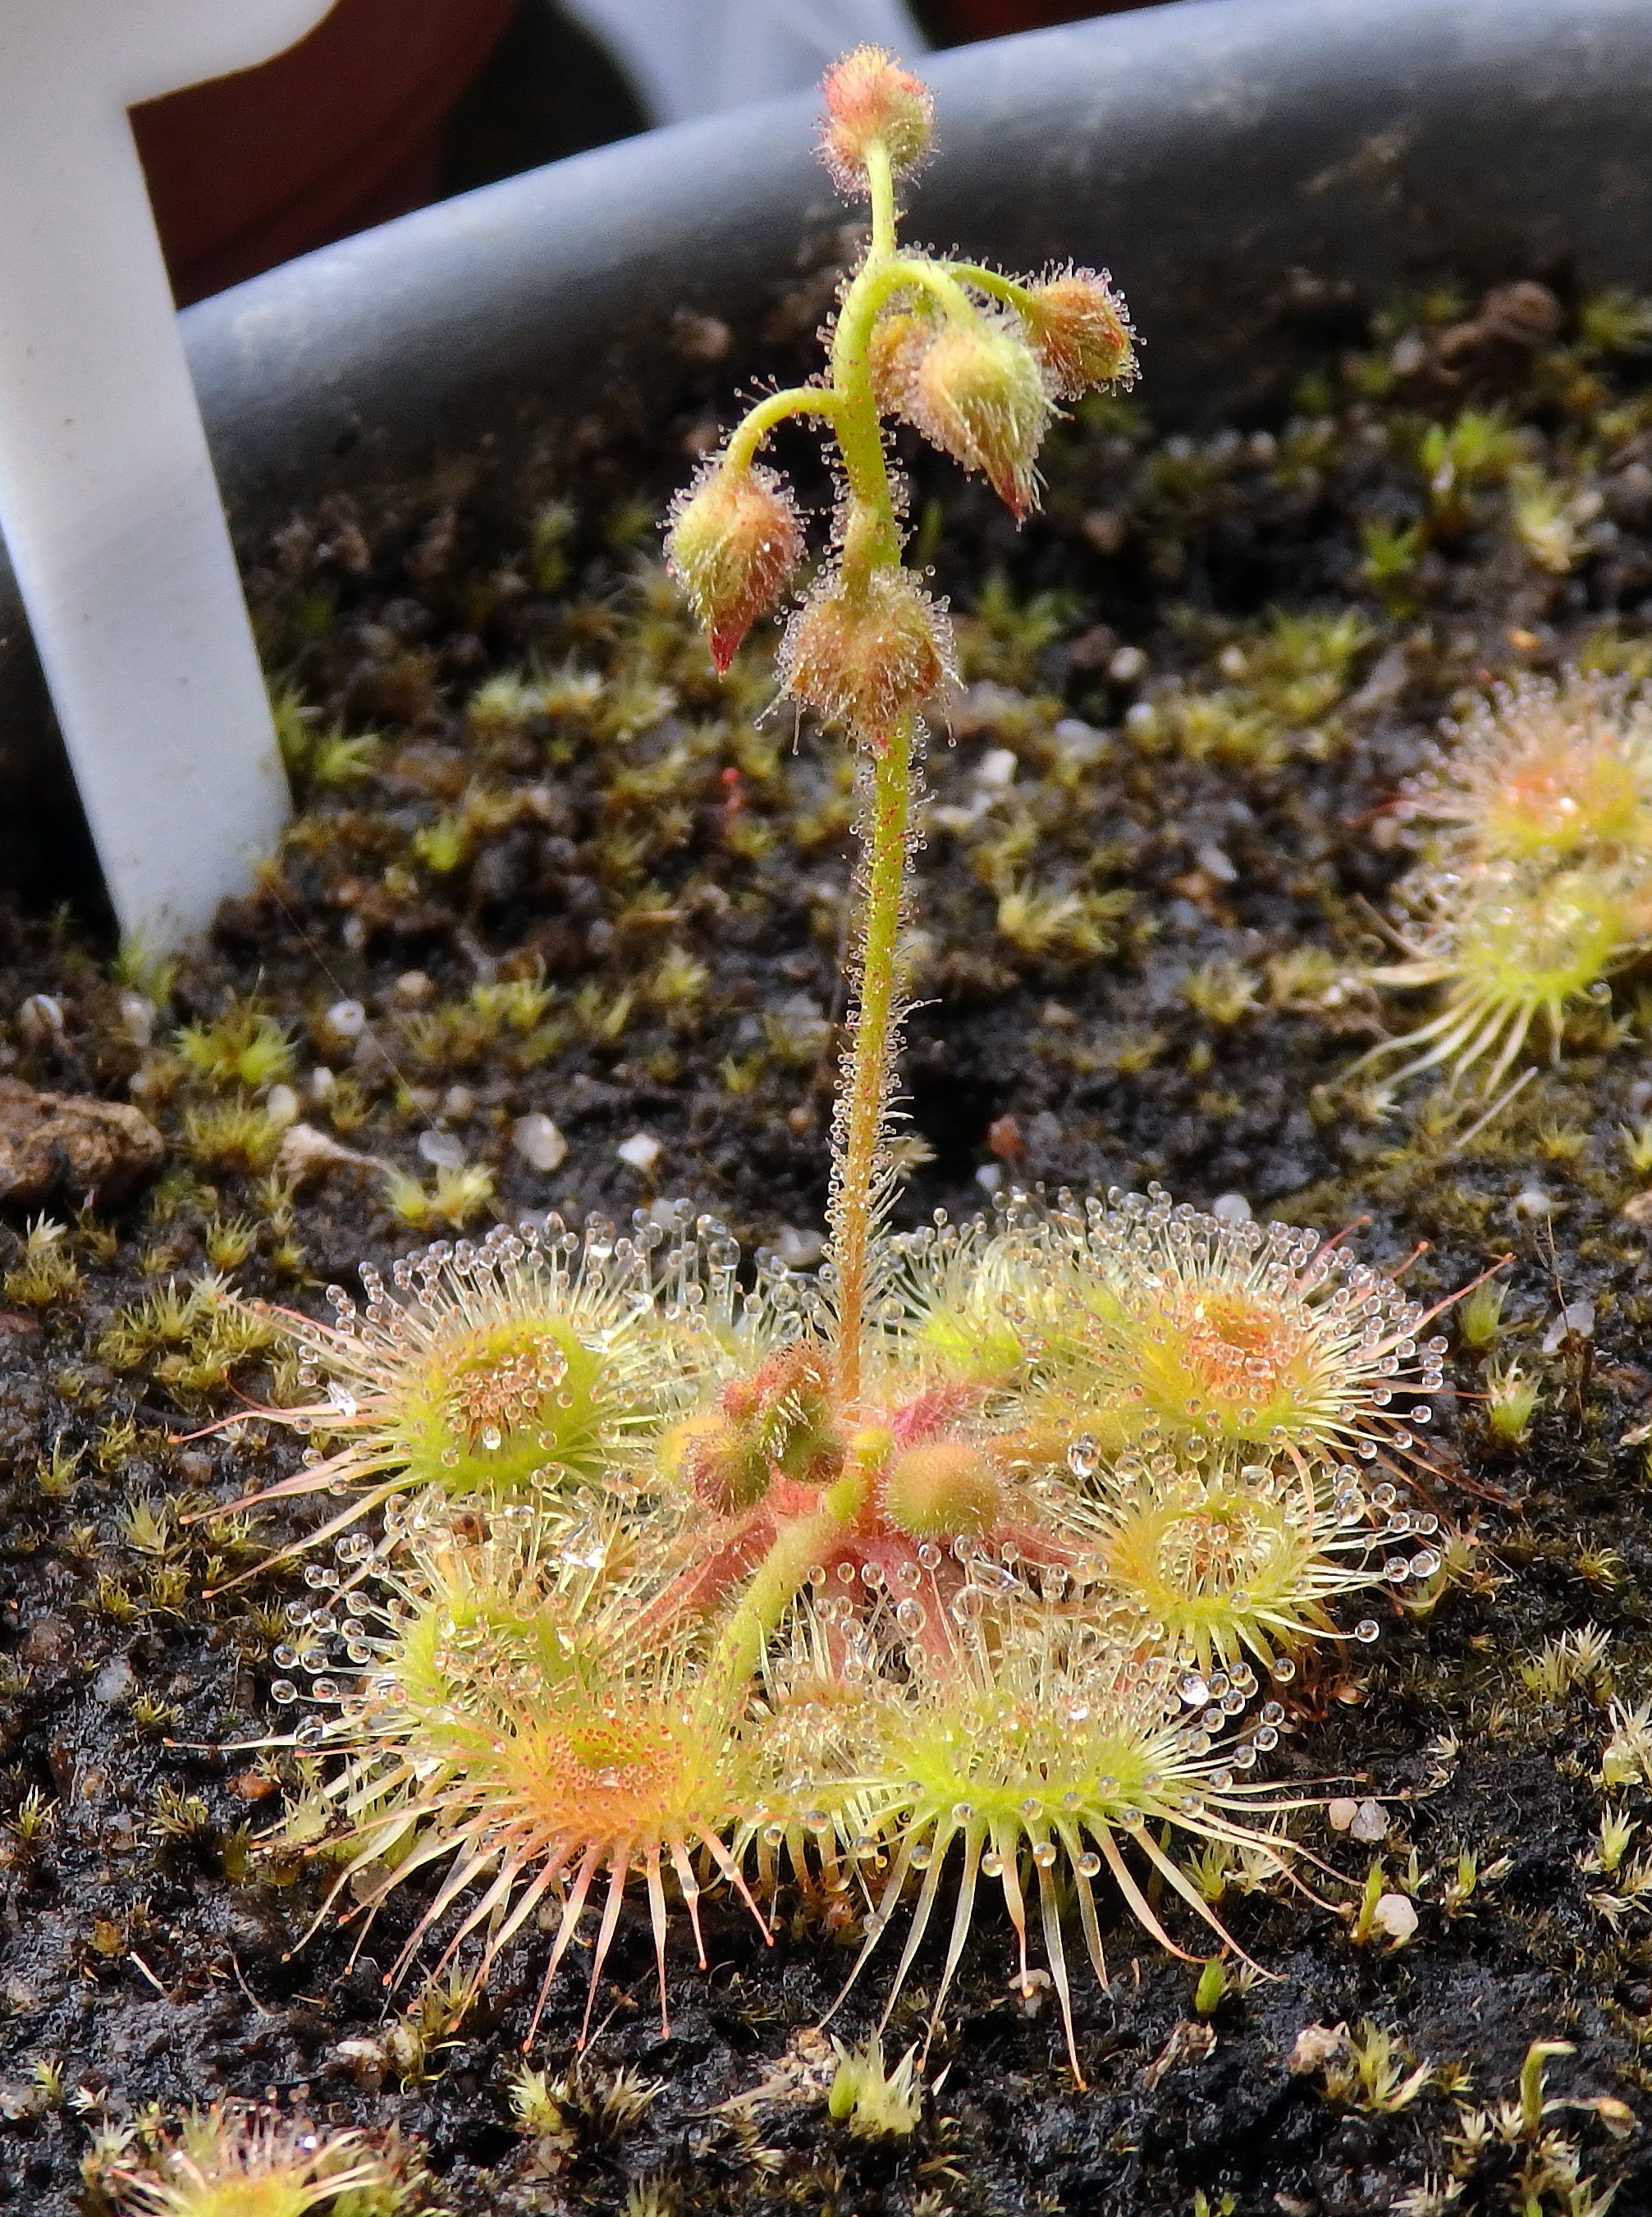 The largest catapulting sundew.